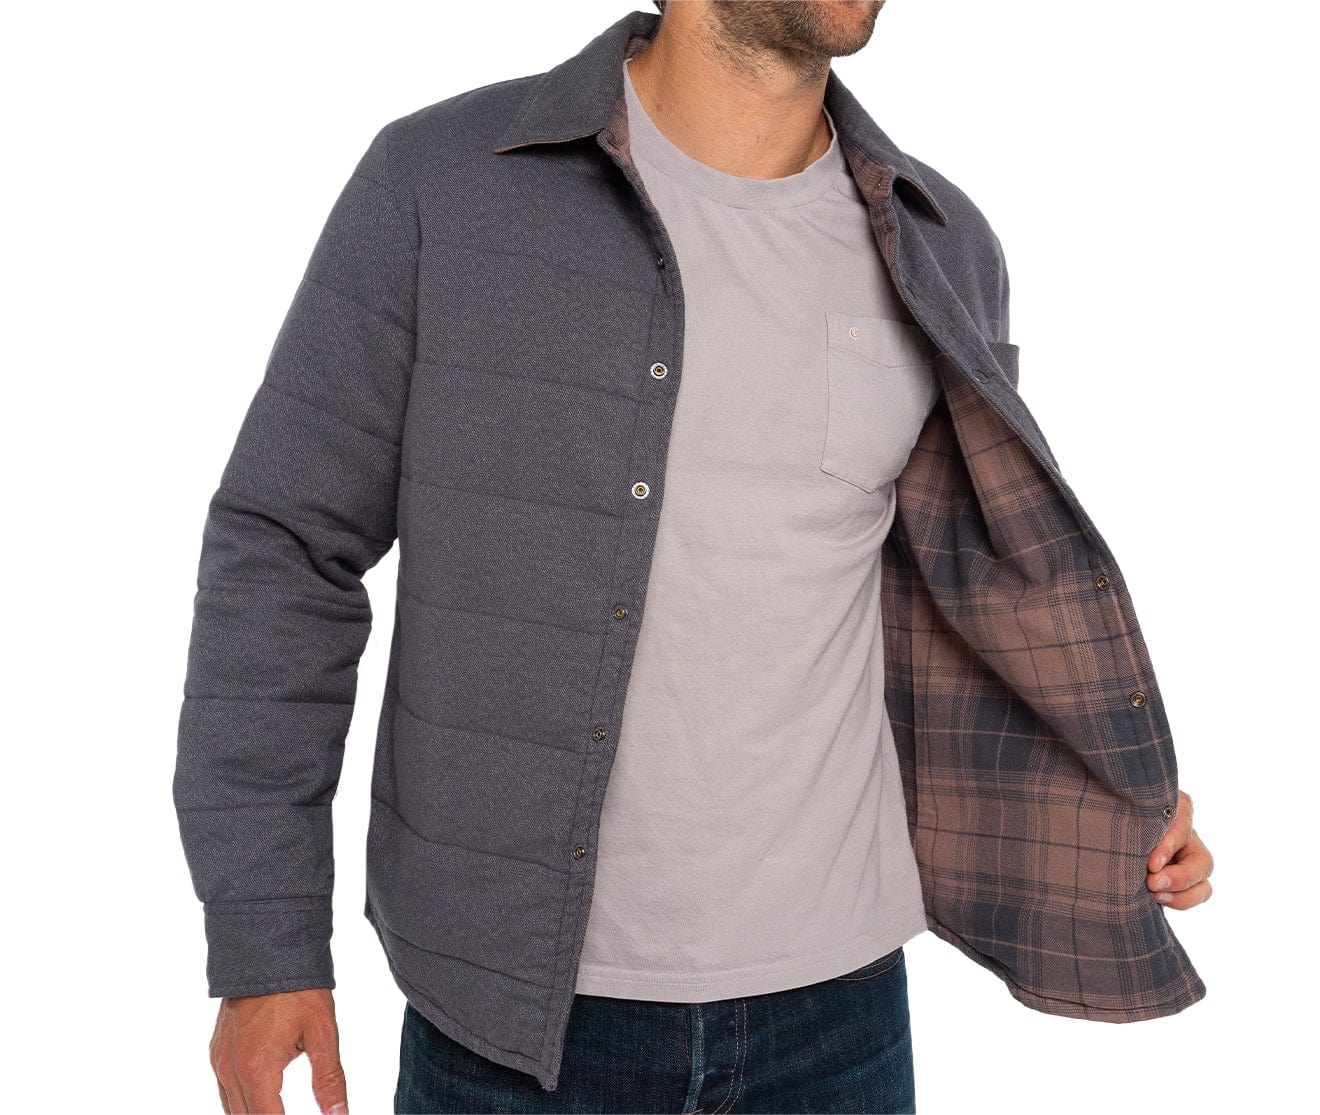 Reversible Flannel Shacket - Charcoal